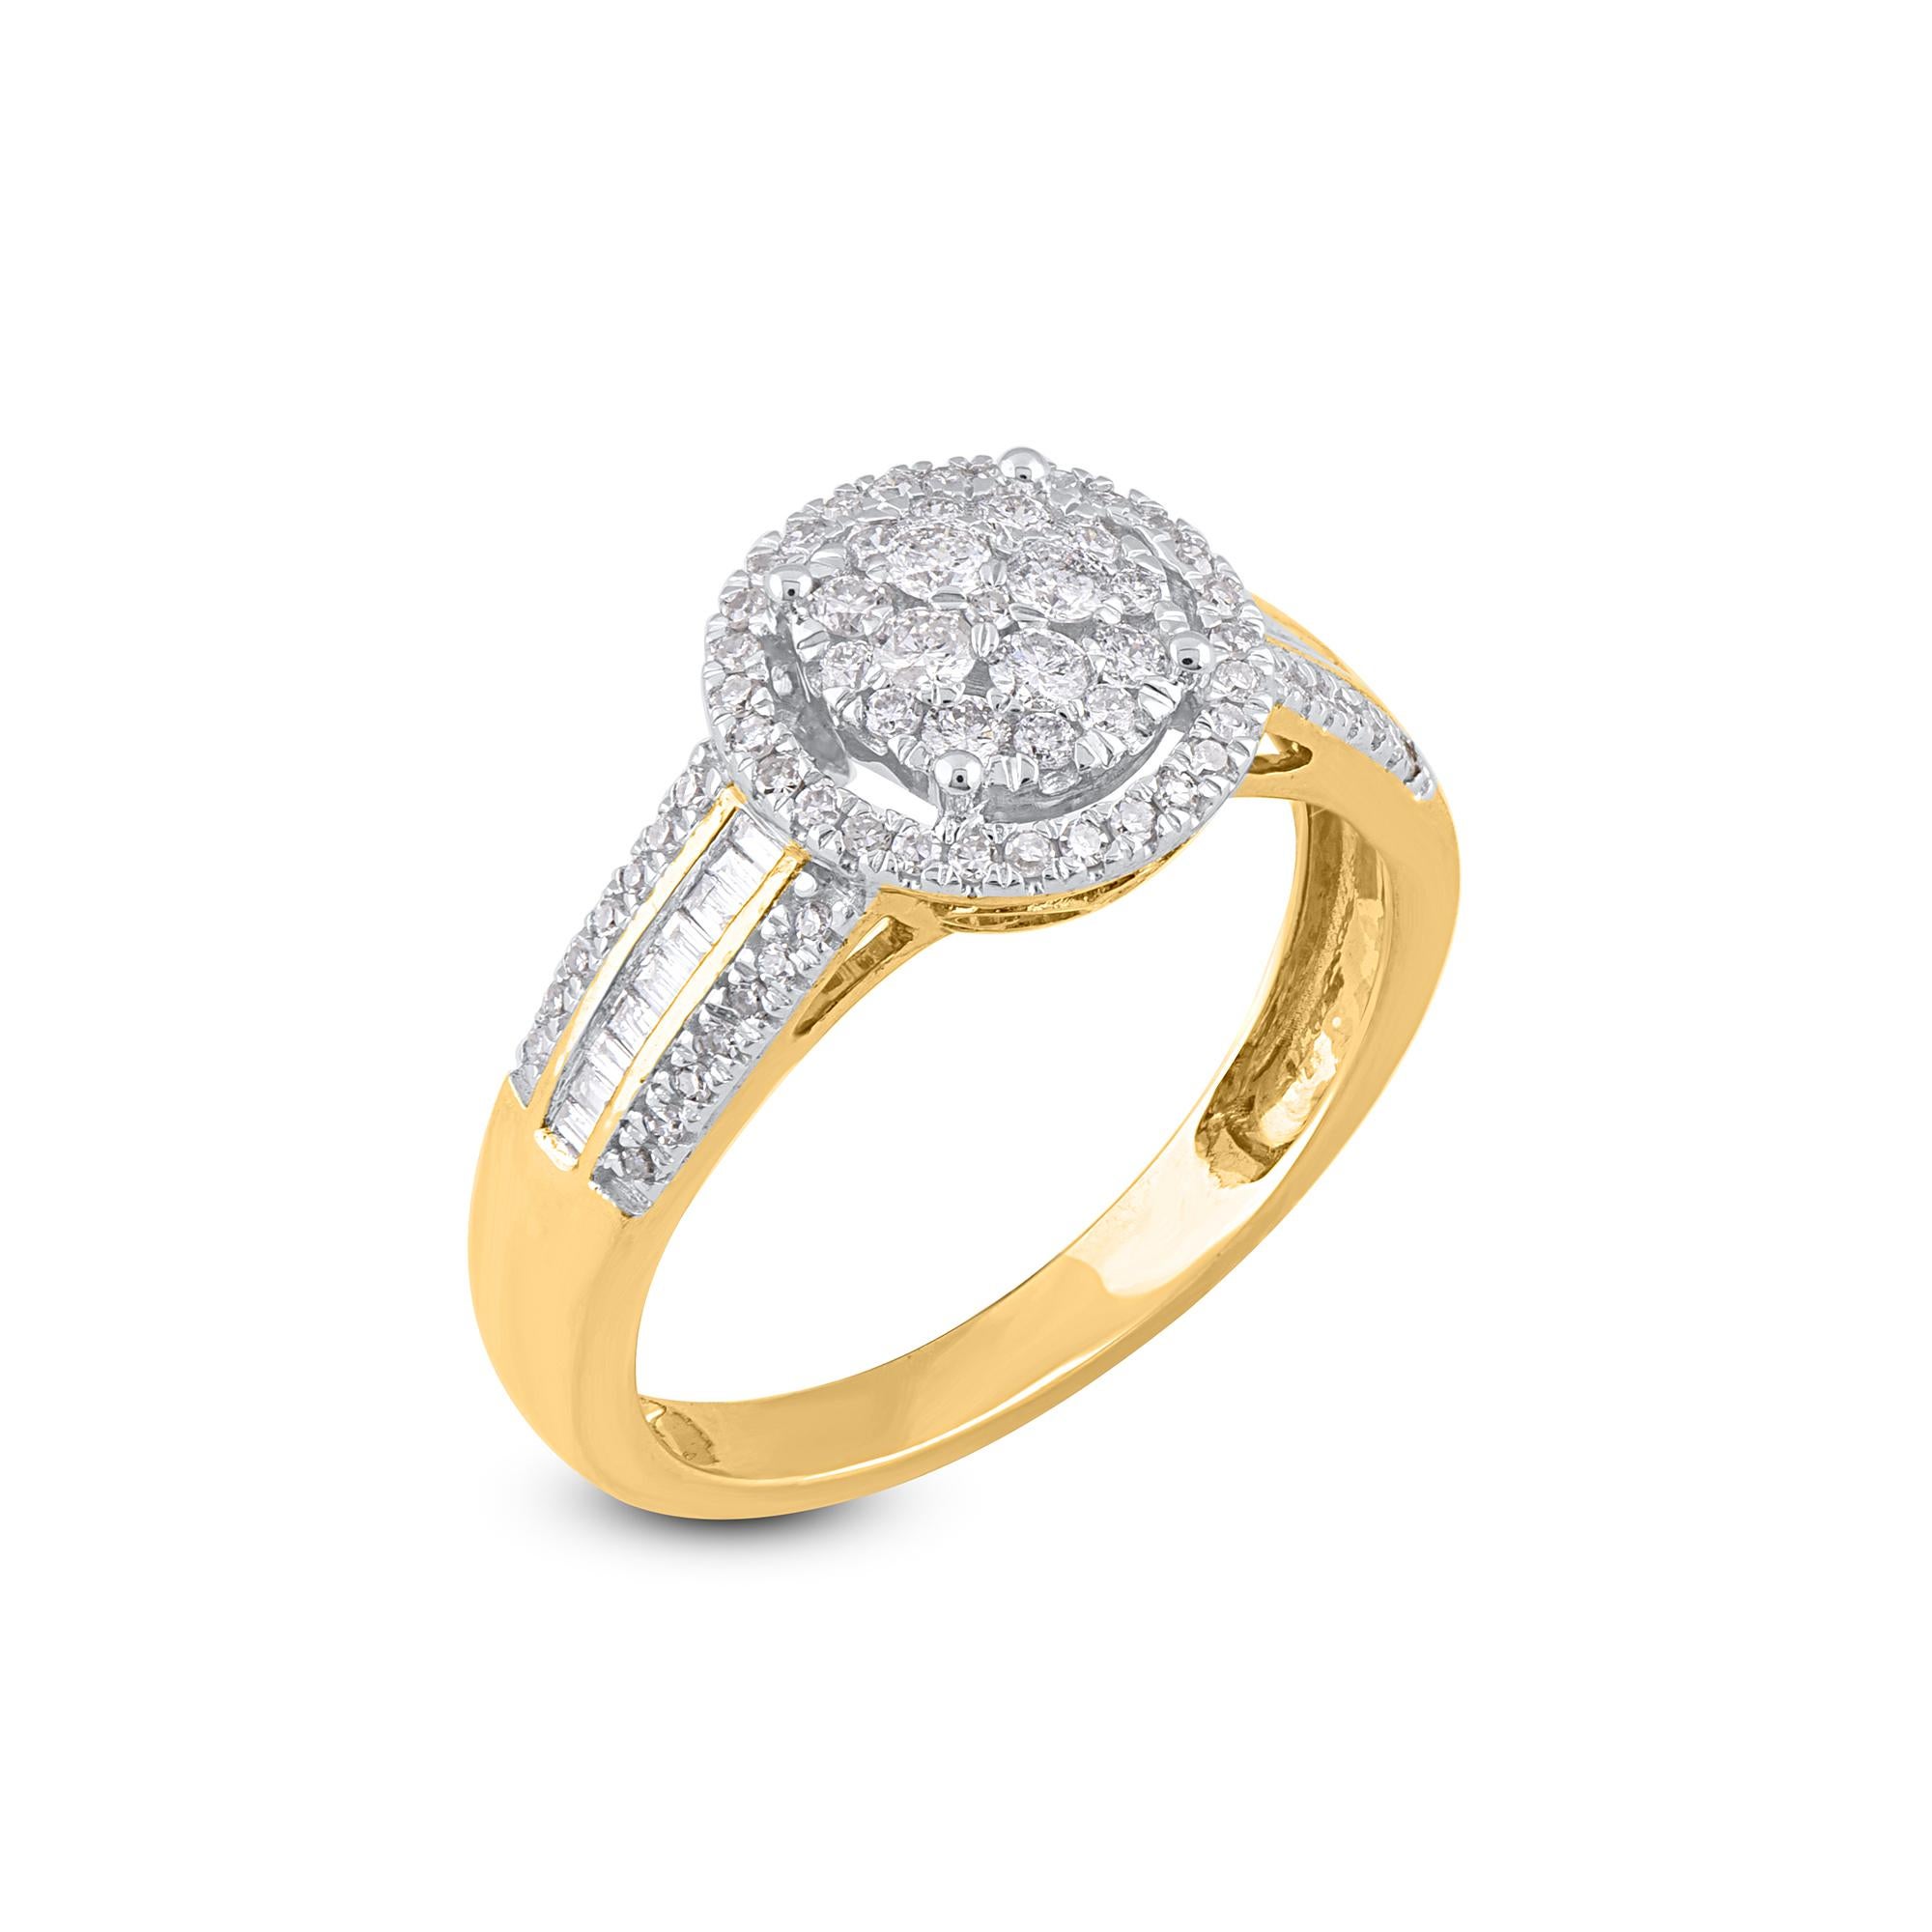 Win her heart with this classic and elegant diamond engagement ring. The diamond ring is crafted from 14 karat yellow gold with 89 brilliant cut and baguette cut diamonds set in channel and prong setting, dazzles in H-I color I2 clarity and a high